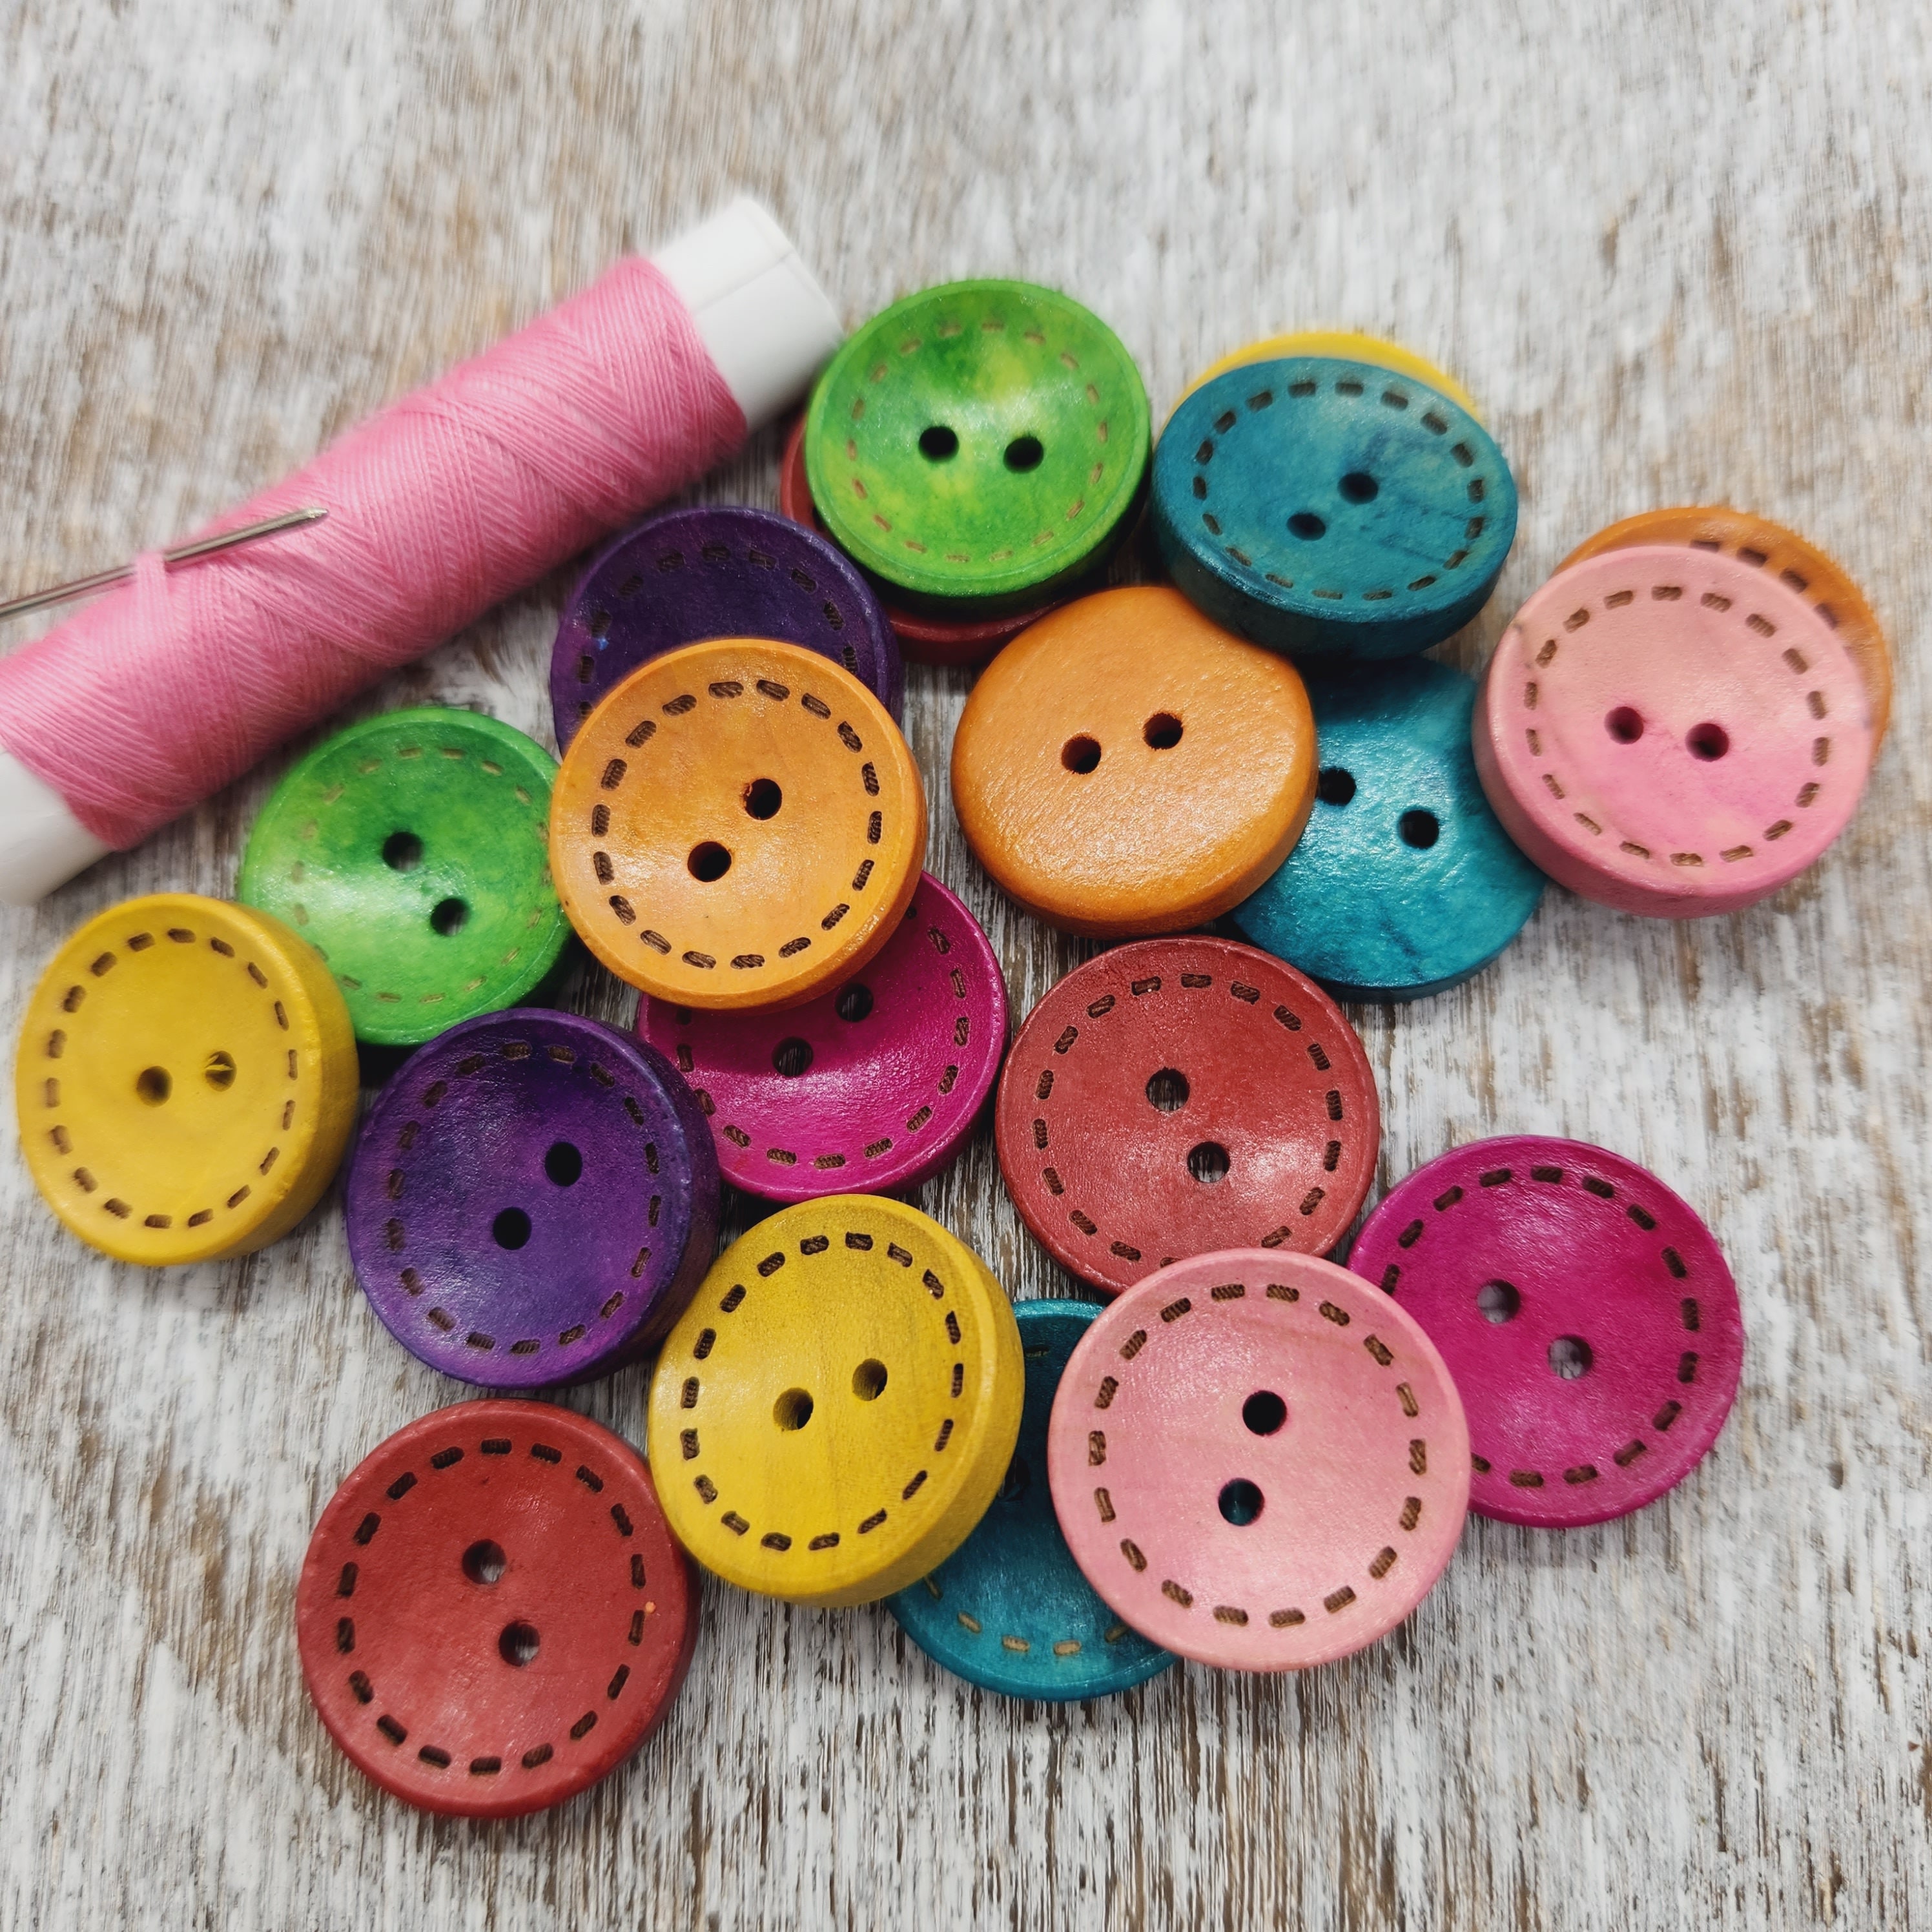 30mm wooden colorful buttons - Set of 4 wood button - Choose your colo